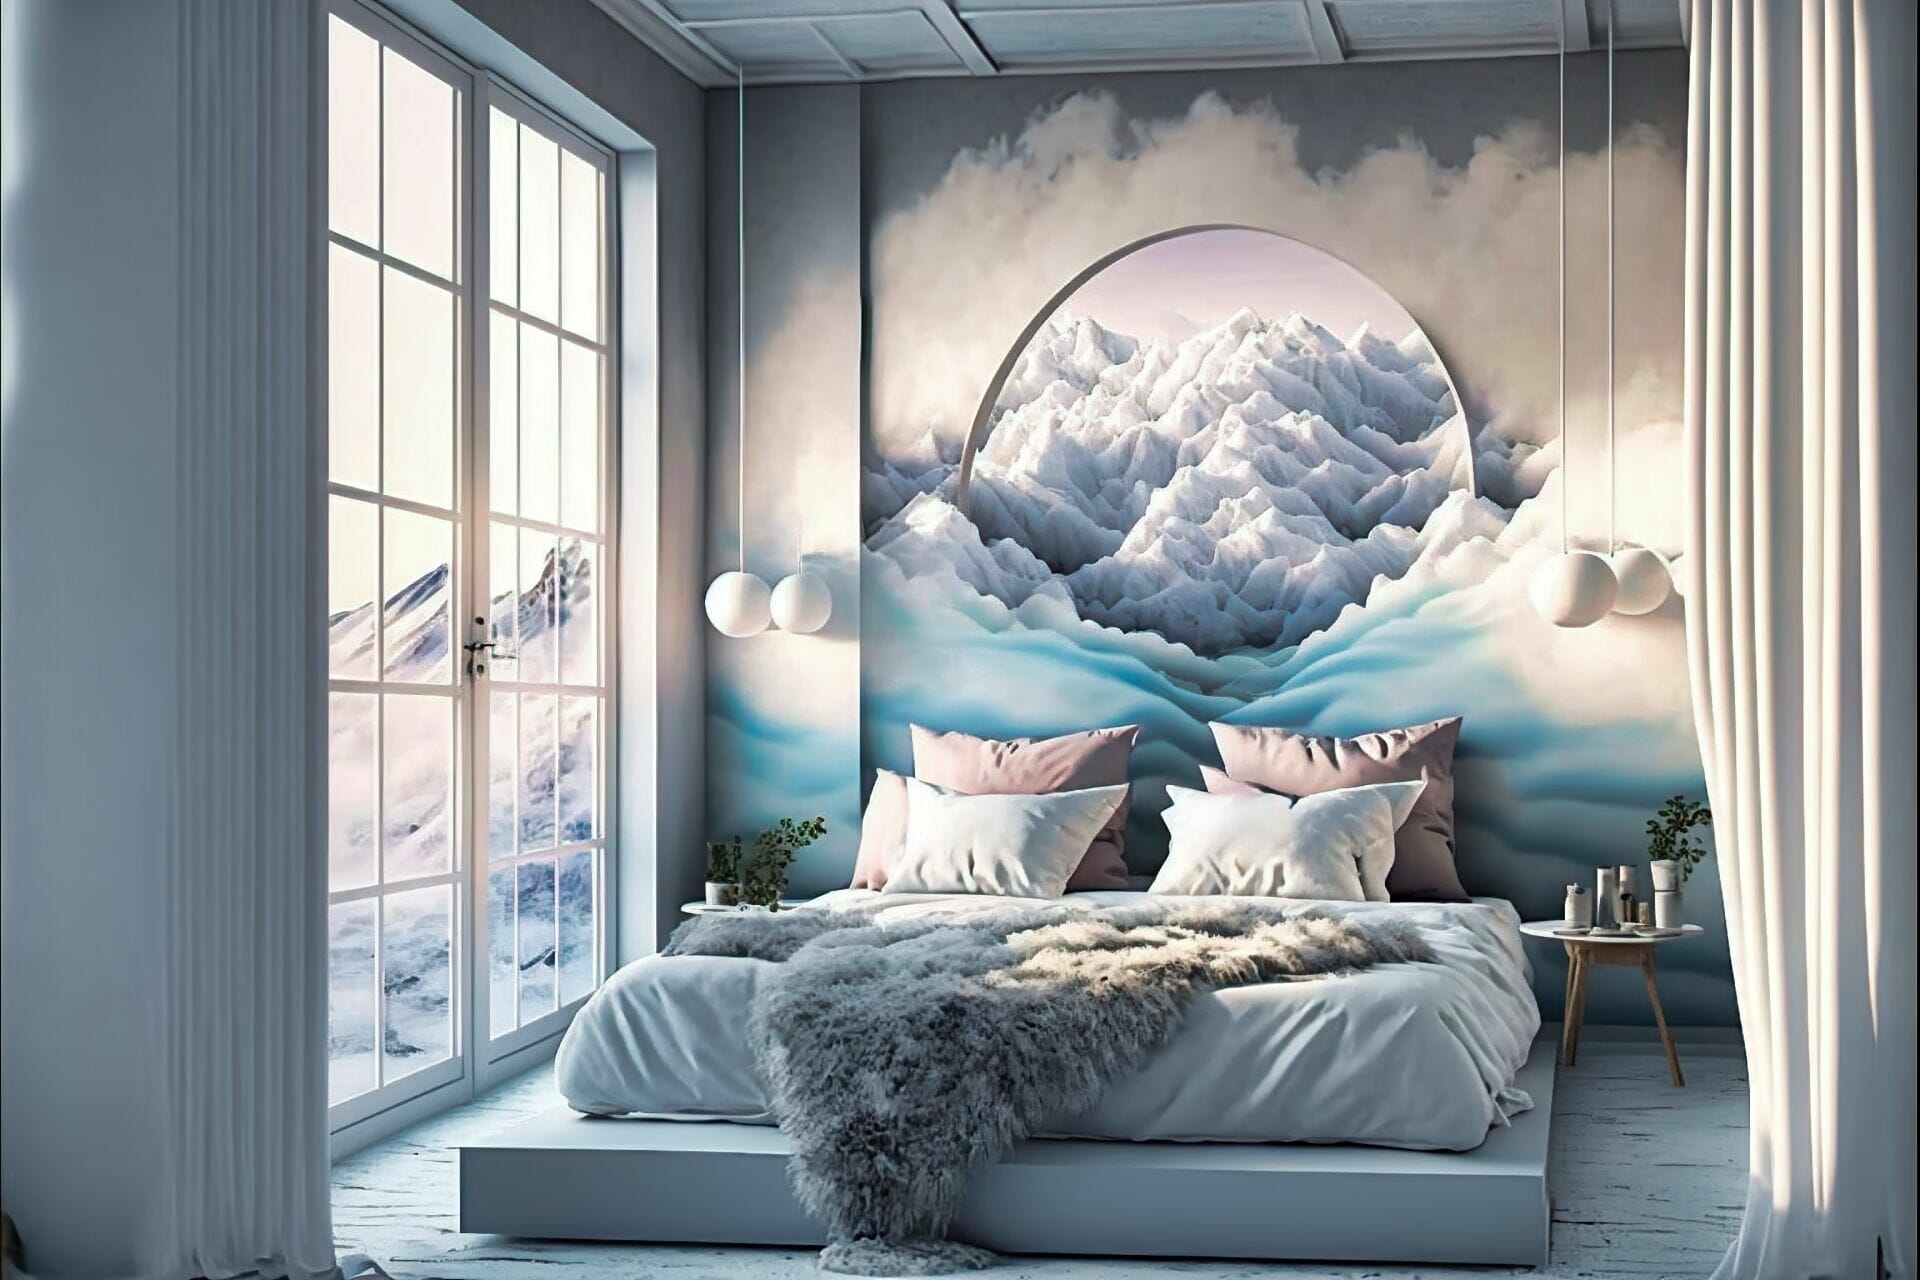 Futuristic Style Bedroom With A Soft And Airy Feel: This Bedroom Features A Dreamy, Airy Atmosphere With Walls, Furniture, And Accents In Shades Of White And Grey. The Bed Is Surrounded By Fluffy White Pillows, And The Walls And Ceiling Are Painted A Soft, Cloudy Blue.